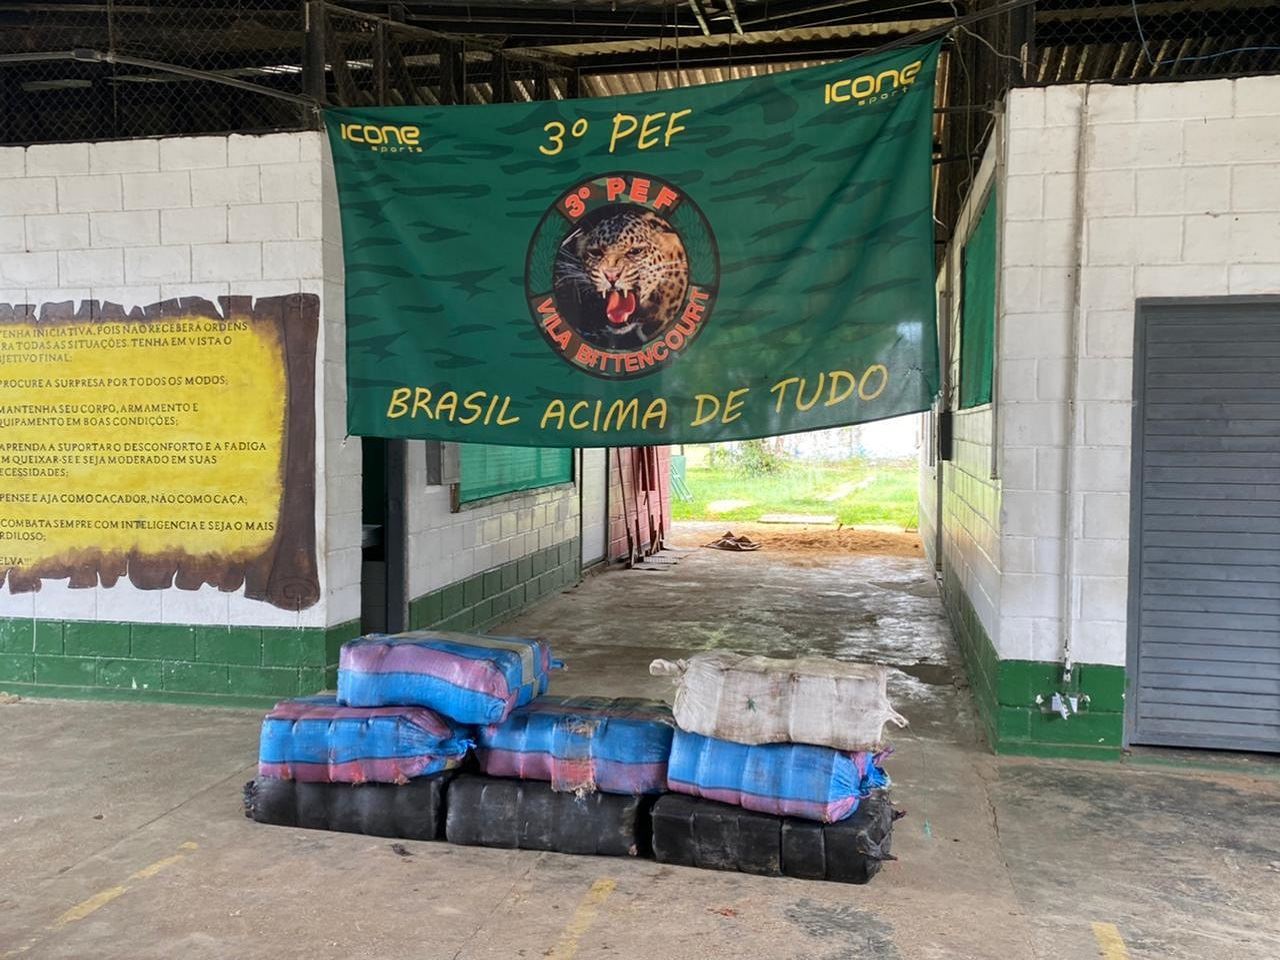 Jungle Brigade seizes more than 2.5 tons of narcotics this year alone